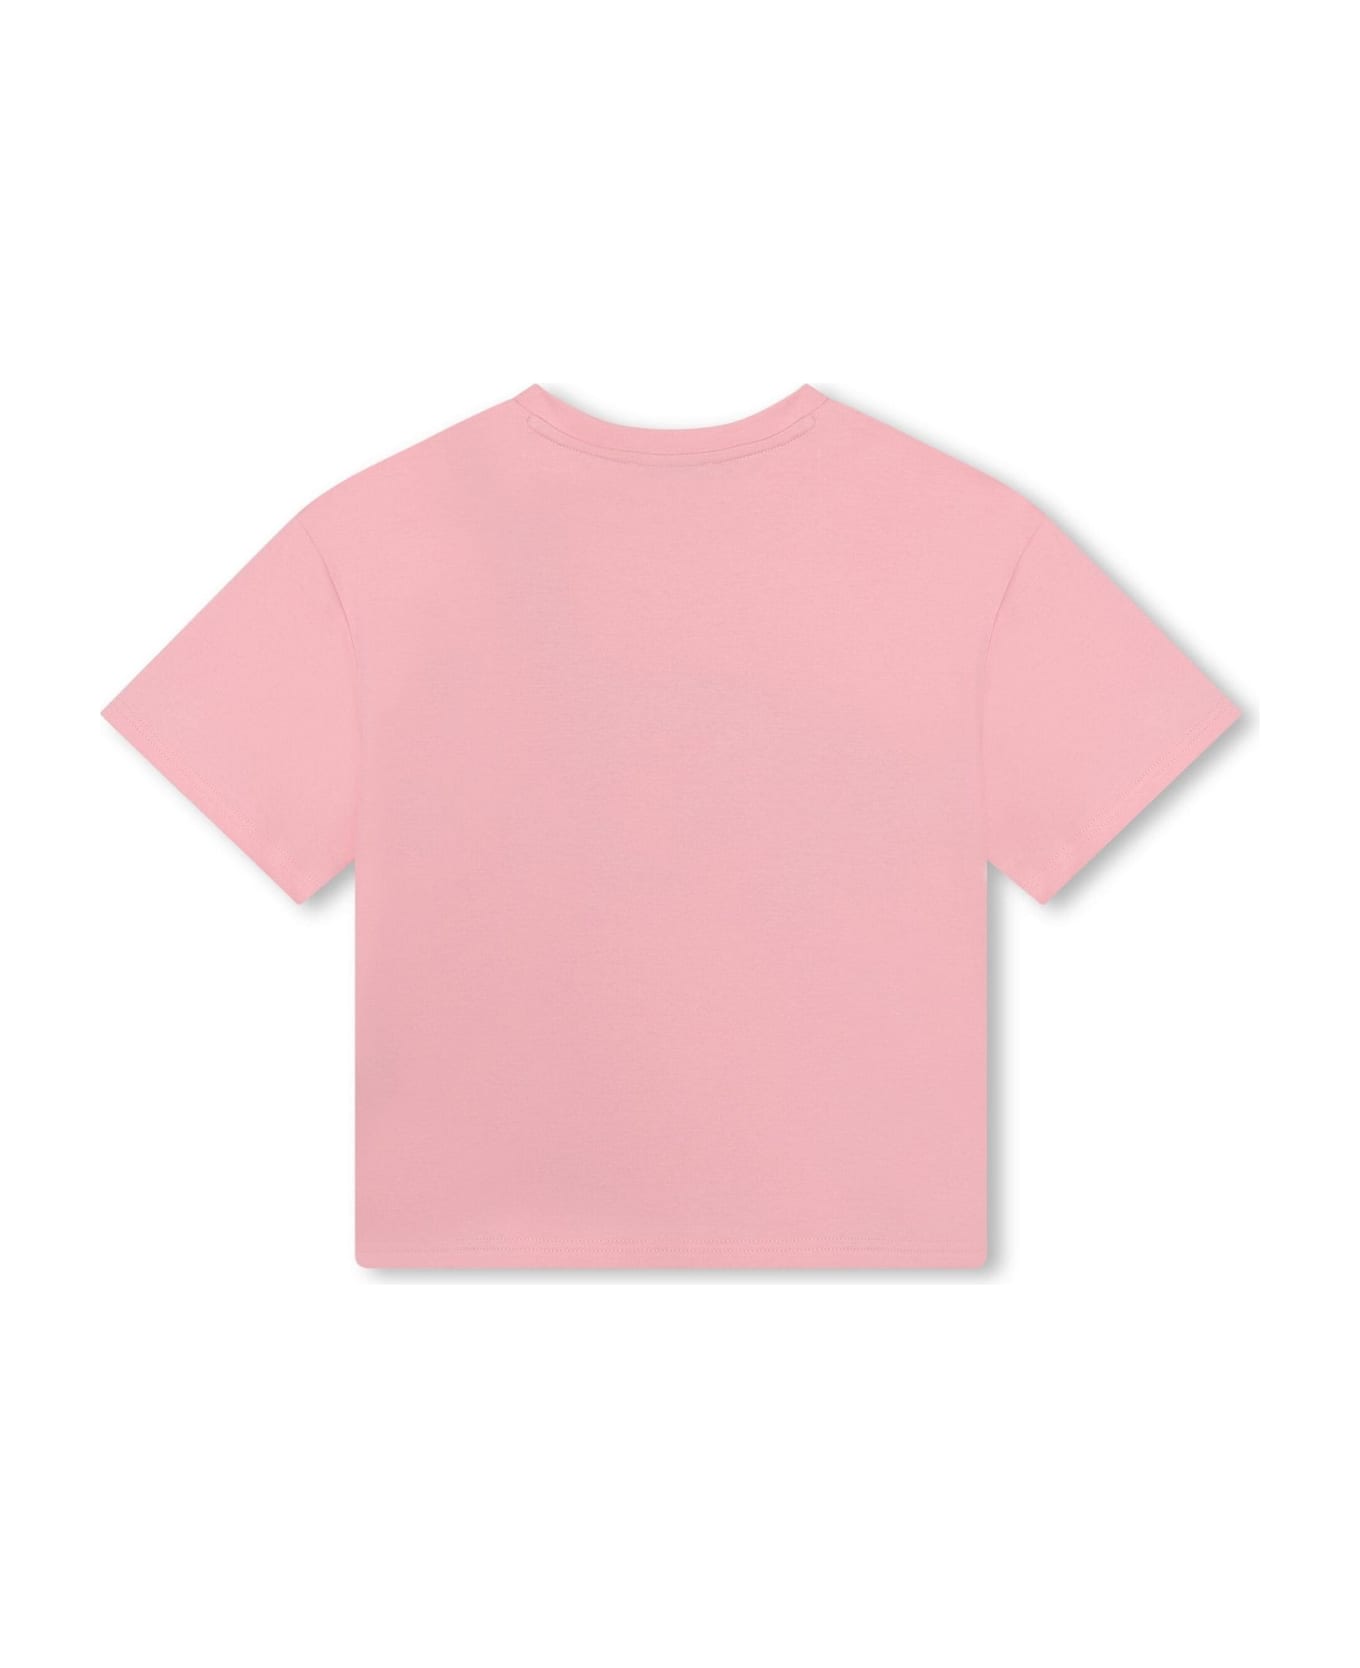 Marc Jacobs T-shirts And Polos Pink - Pink